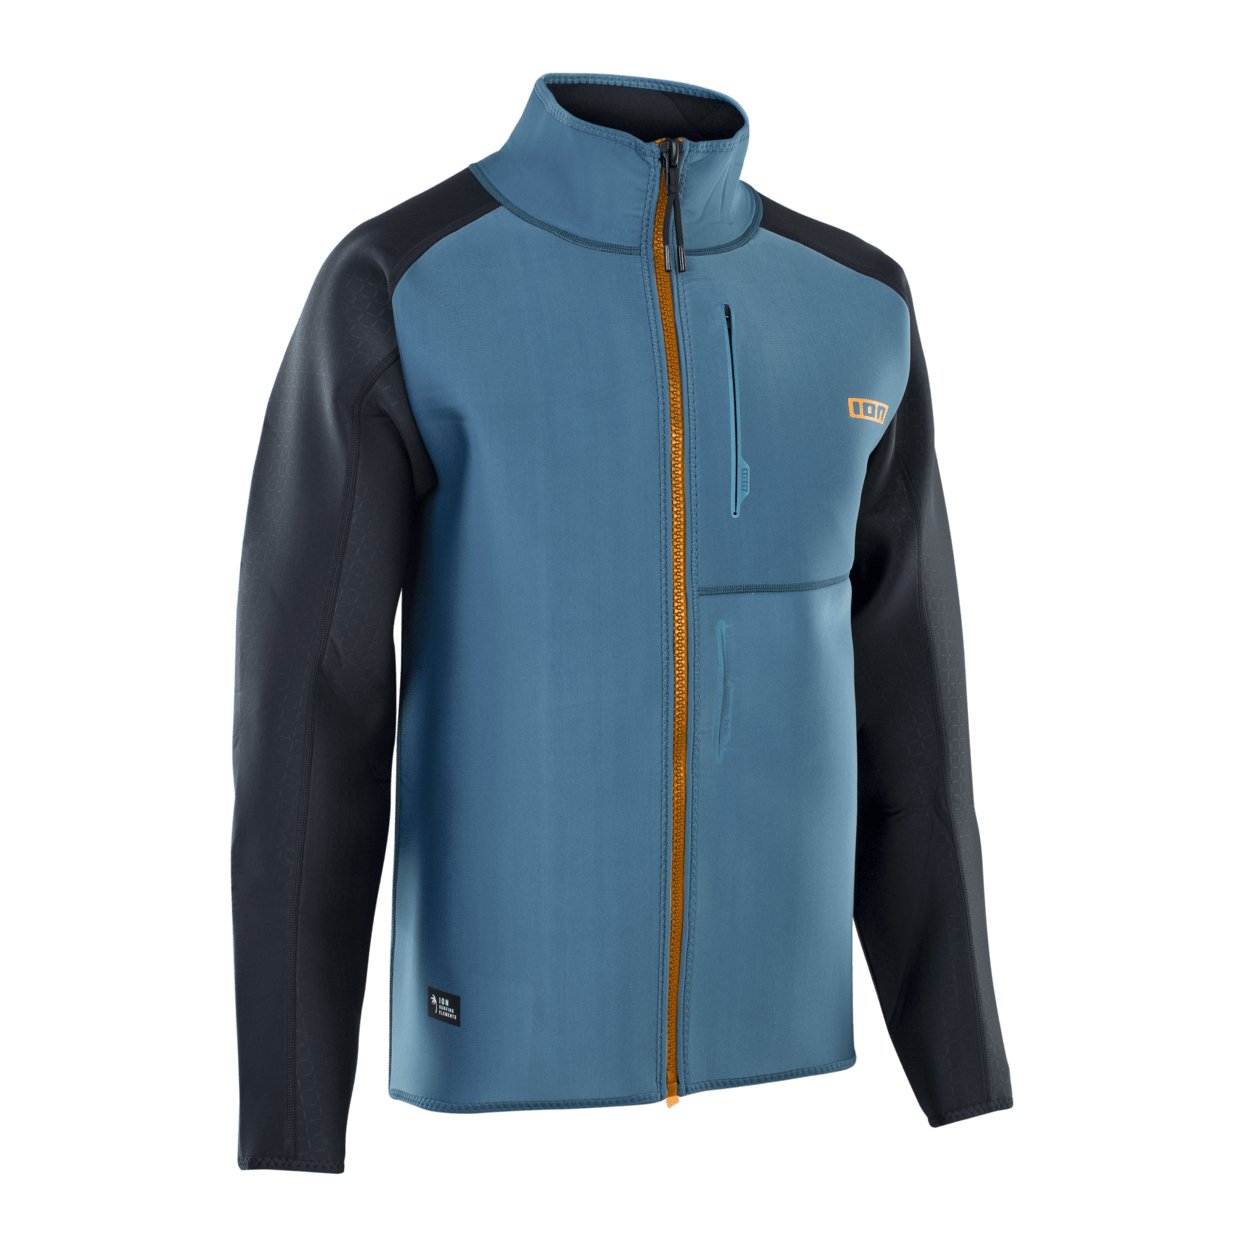 ION Neo Cruise Jacket men 2022 - Worthing Watersports - 9010583052878 - Tops - ION Water